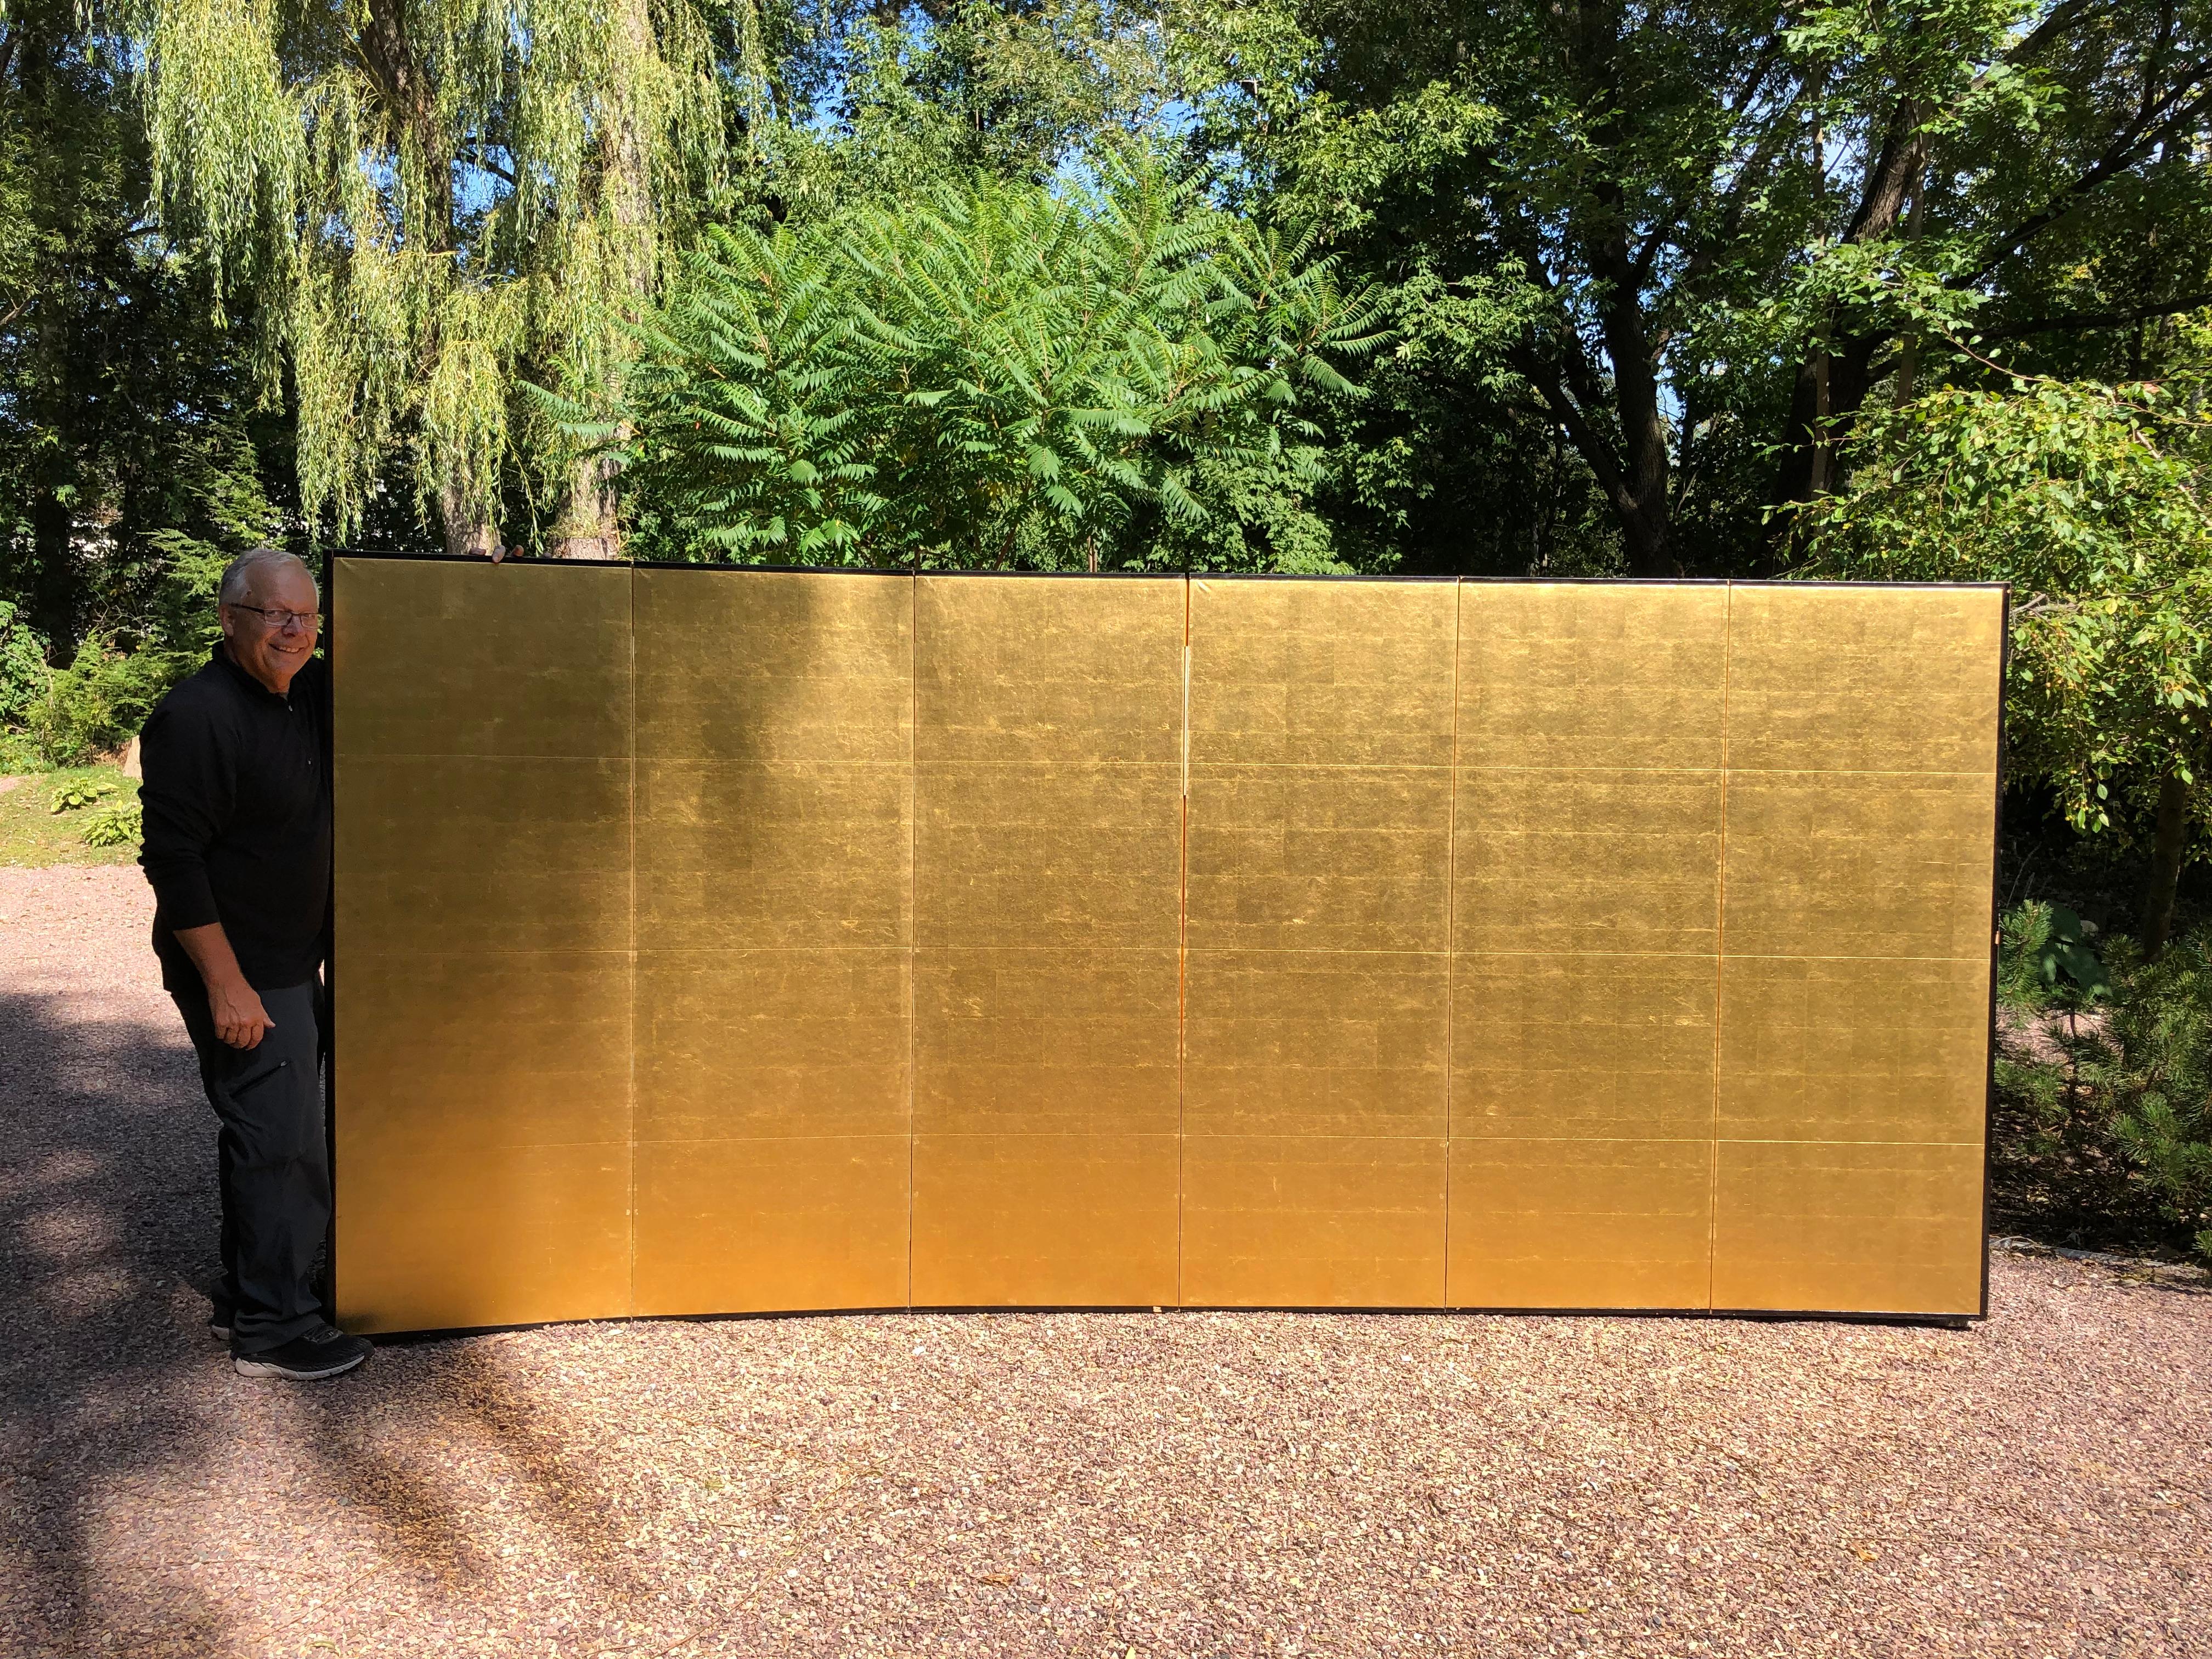 From our recent Japanese Acquisition Travels

Fashioned by hand in stunning gold leaf .

Japan, a fine six-panel screen byobu carefully crafted by a professional artisan with hand applied gold leaf. This attractive screen dates to the Meiji period,